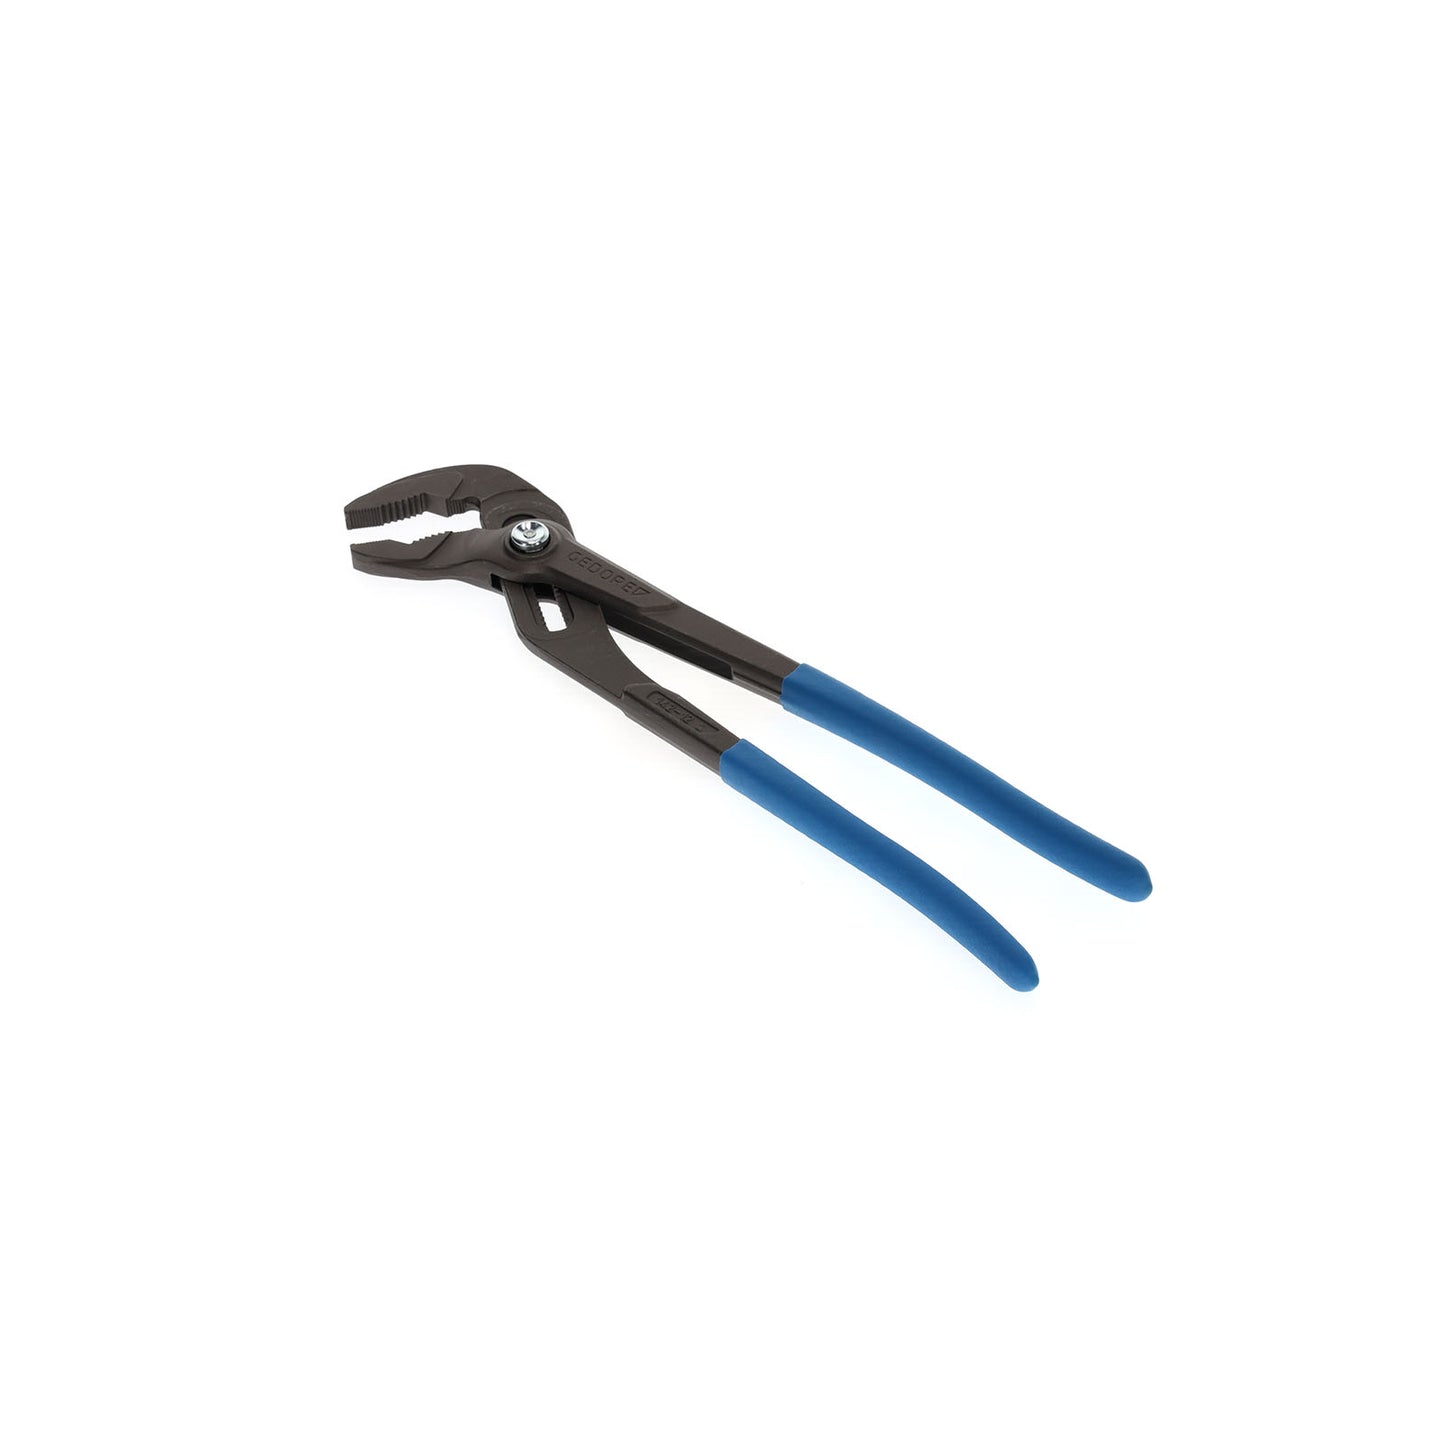 GEDORE 142 12 TL - Universal pliers (1995413)